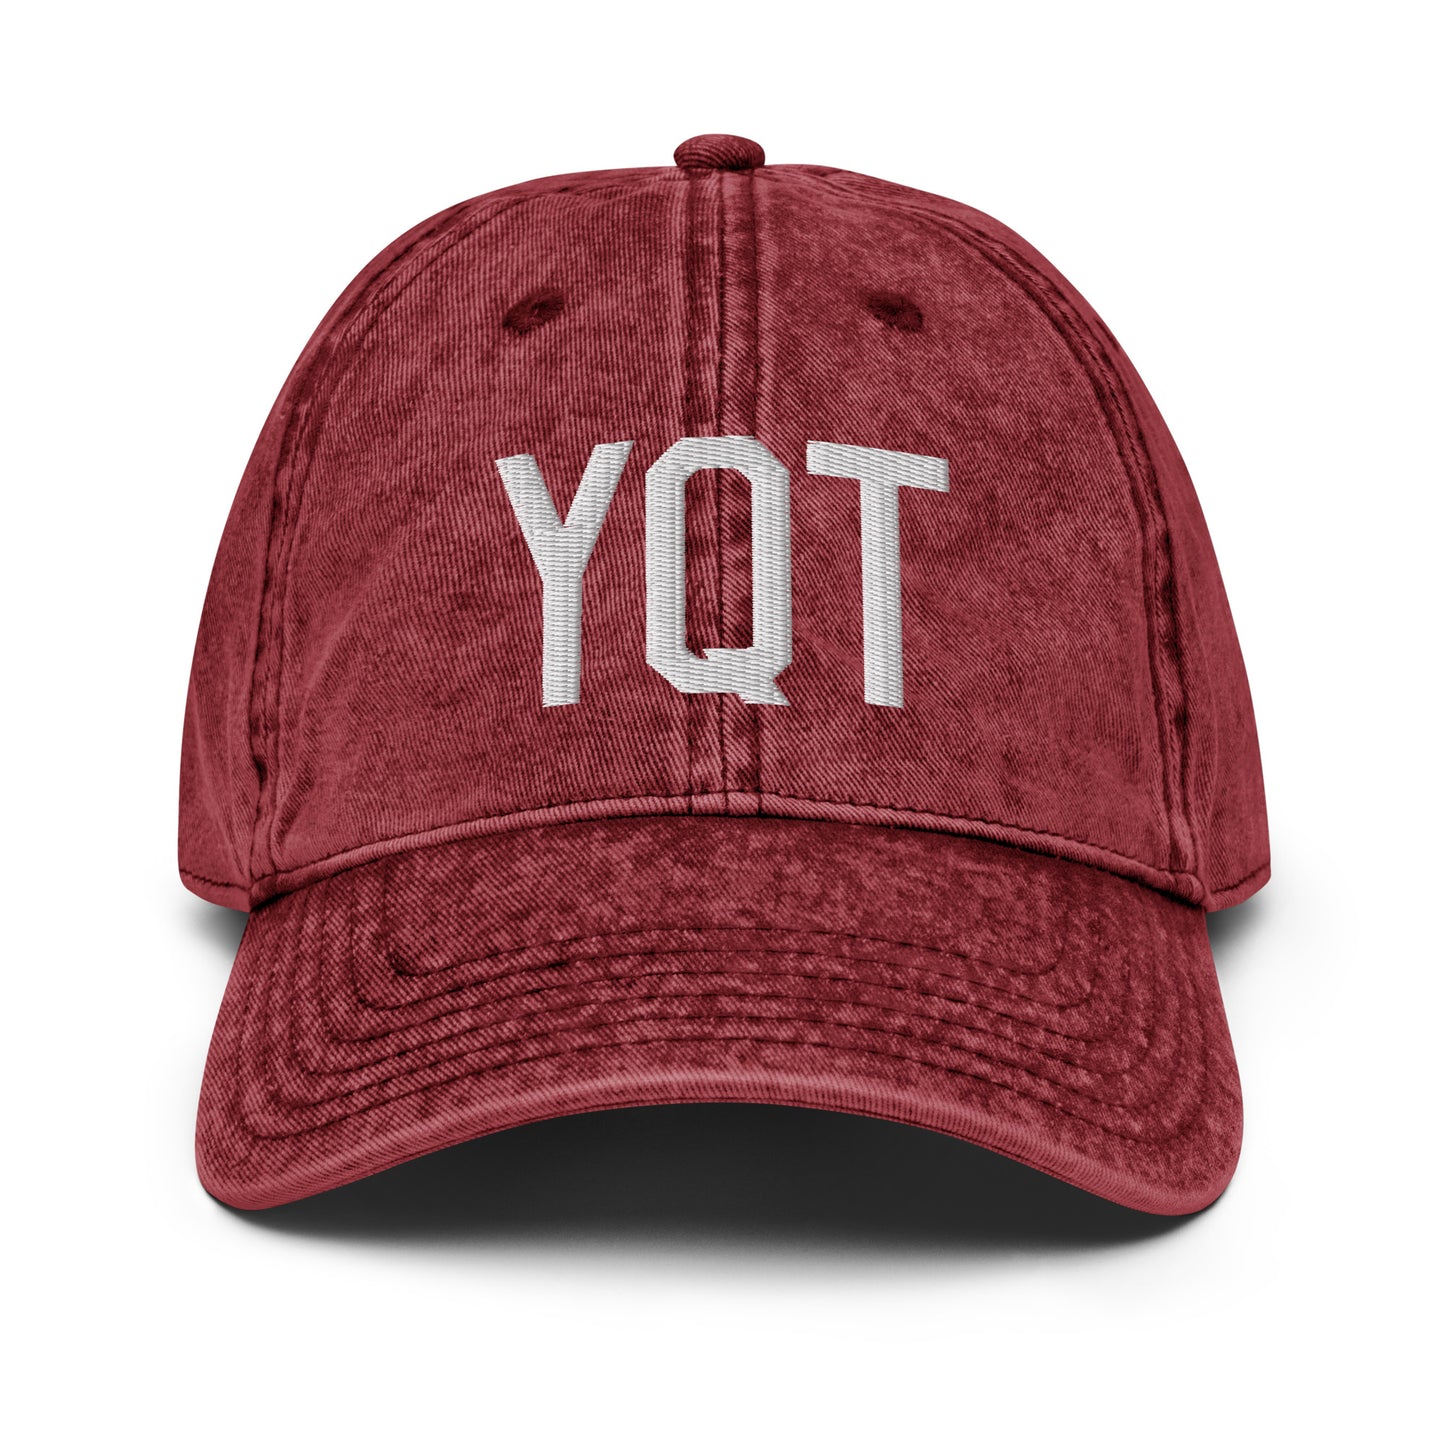 Airport Code Twill Cap - White • YQT Thunder Bay • YHM Designs - Image 19